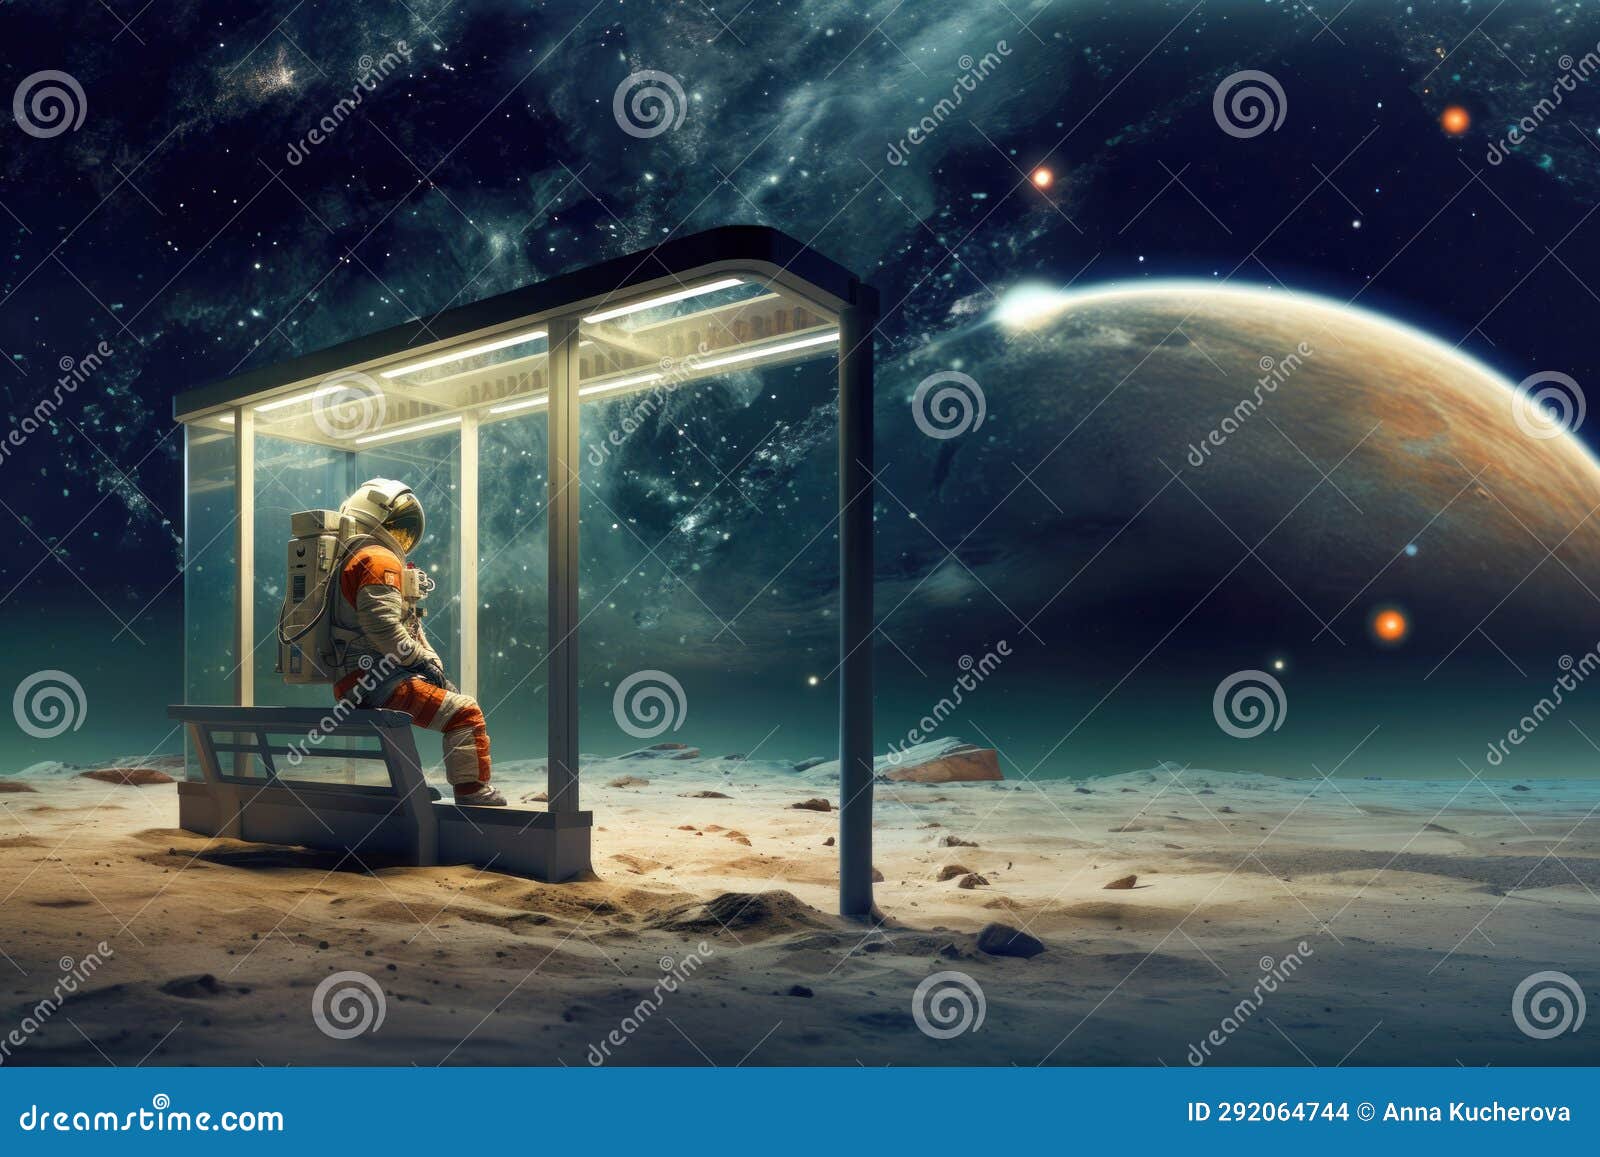 astronaut sits at a bus stop under a star-speckled sky of another planet waiting for a transport to come. intergalactic travel sci